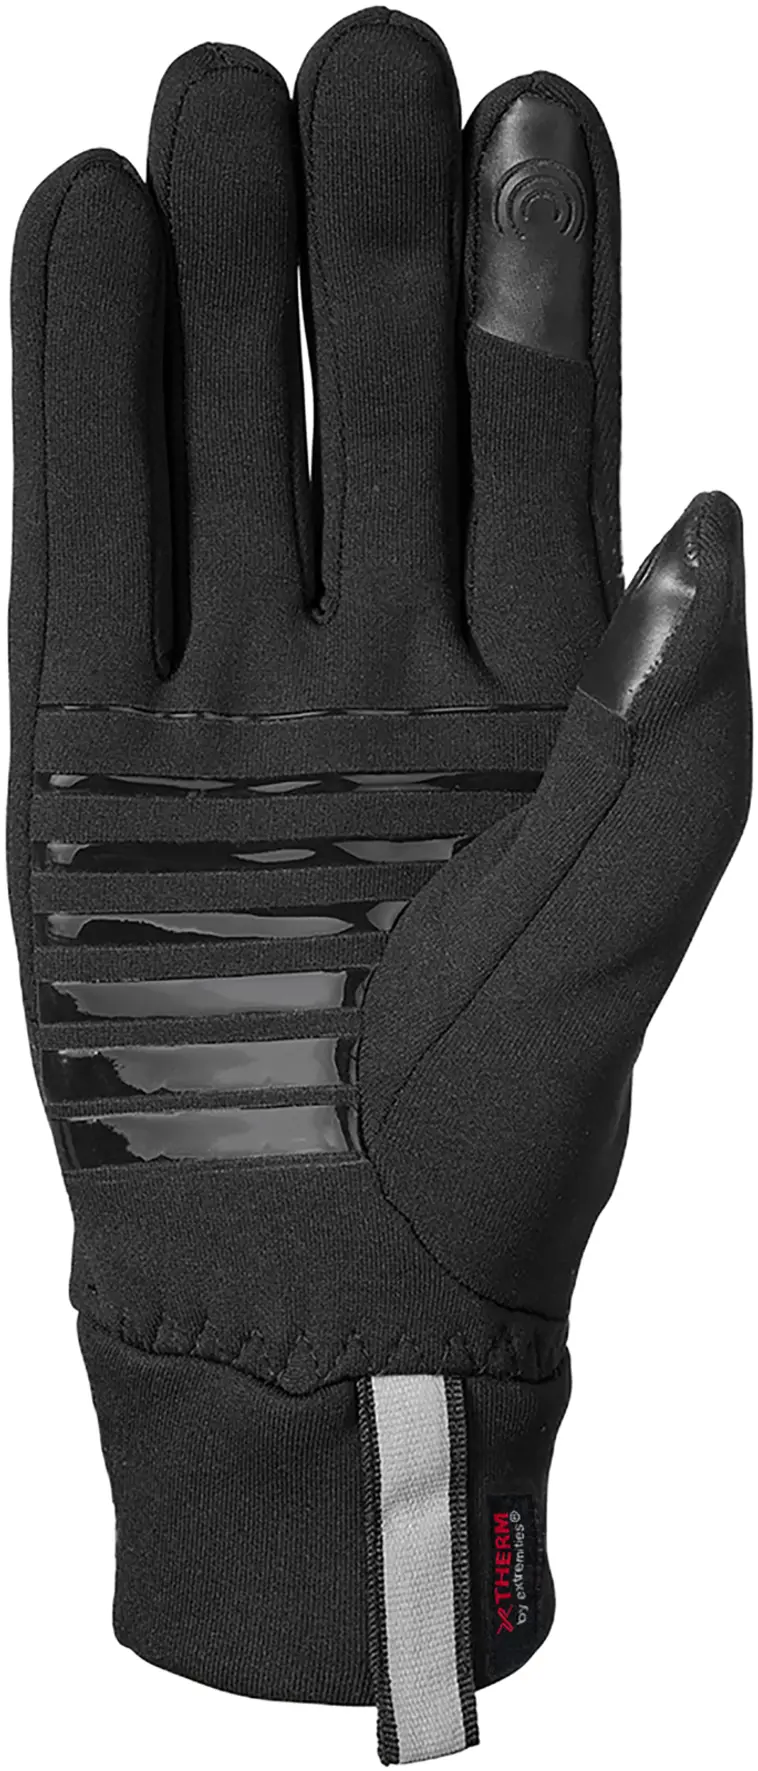 Extremities sormikkaat Sticky X Therm - BLACK - 3